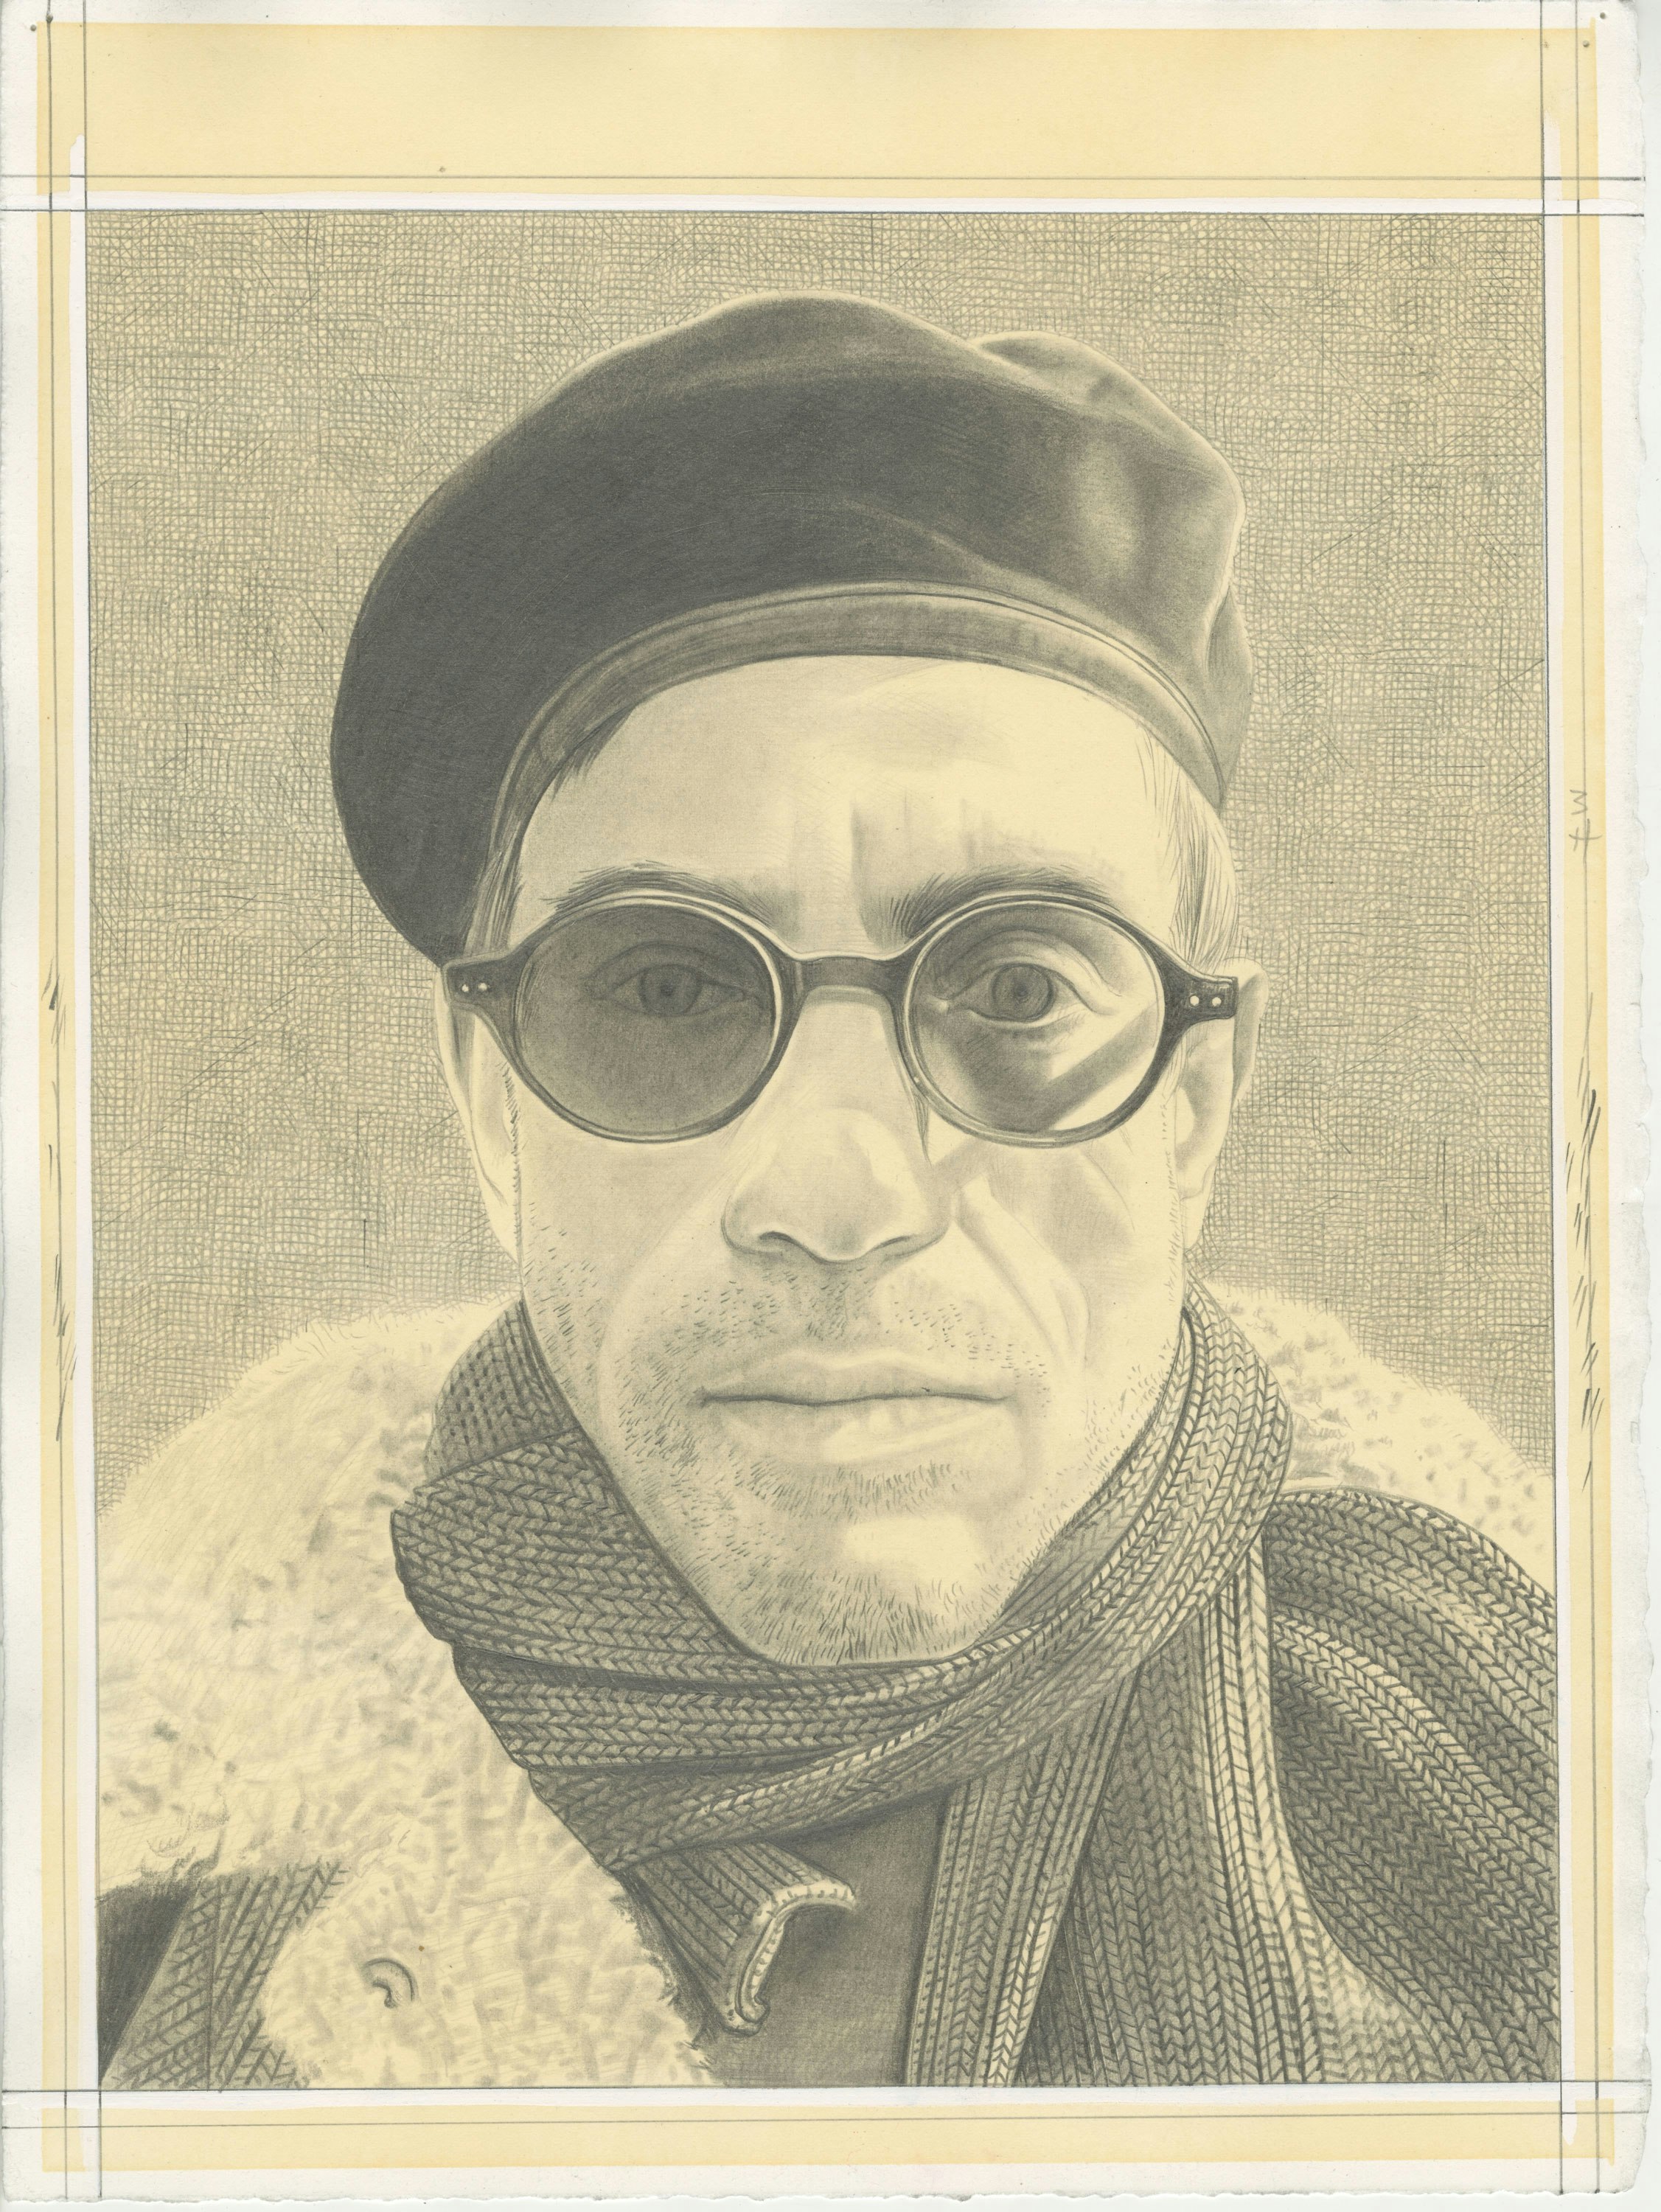 Portrait of Gregg Bordowitz, pencil on paper by Phong H. Bui.